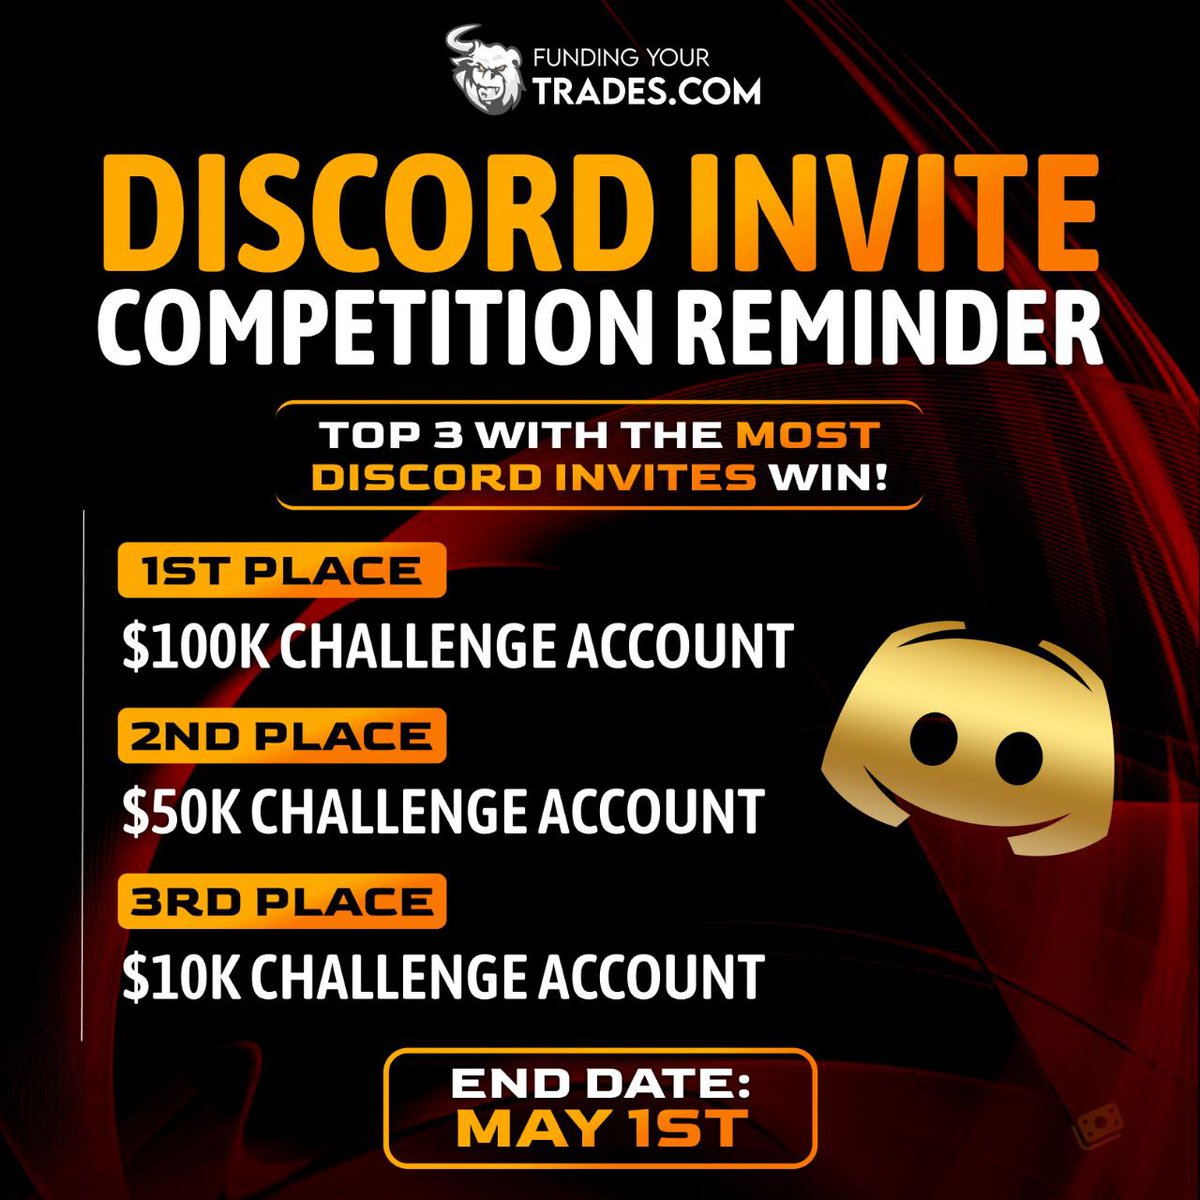 🌟Reminder: FundingYourTrades.com Discord Invite Competition! 🥇 1st Place: $100K Challenge Account 🥈 2nd Place: $50K Challenge Account 🥉 3rd Place: $10K Challenge Account Top 3 with the most invites by May 1st win! Join and invite now: discord.com/invite/6zBy5En… Good luck!